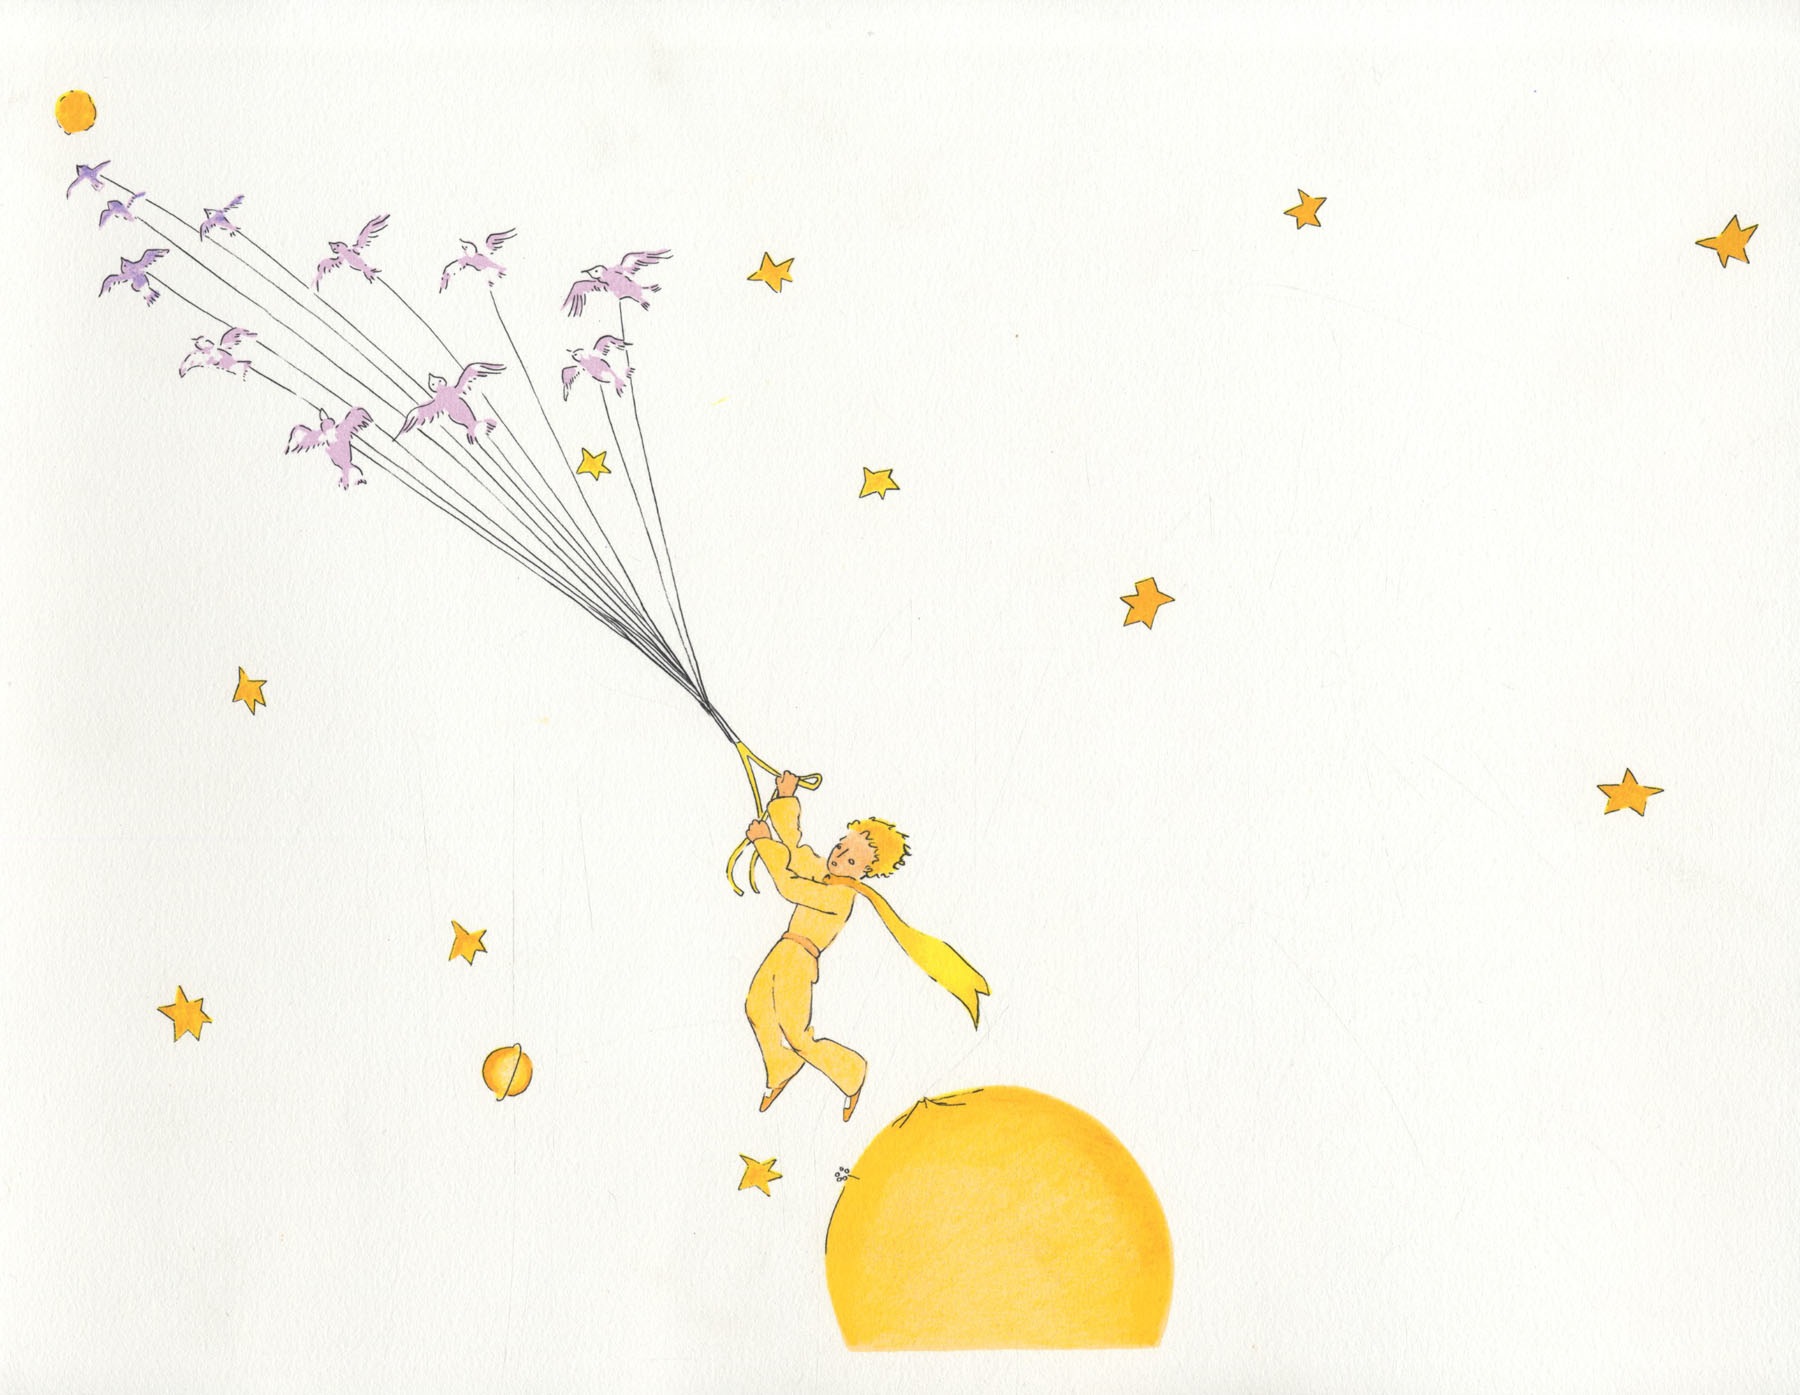 To Have an Innocent Mind Like the Little Prince